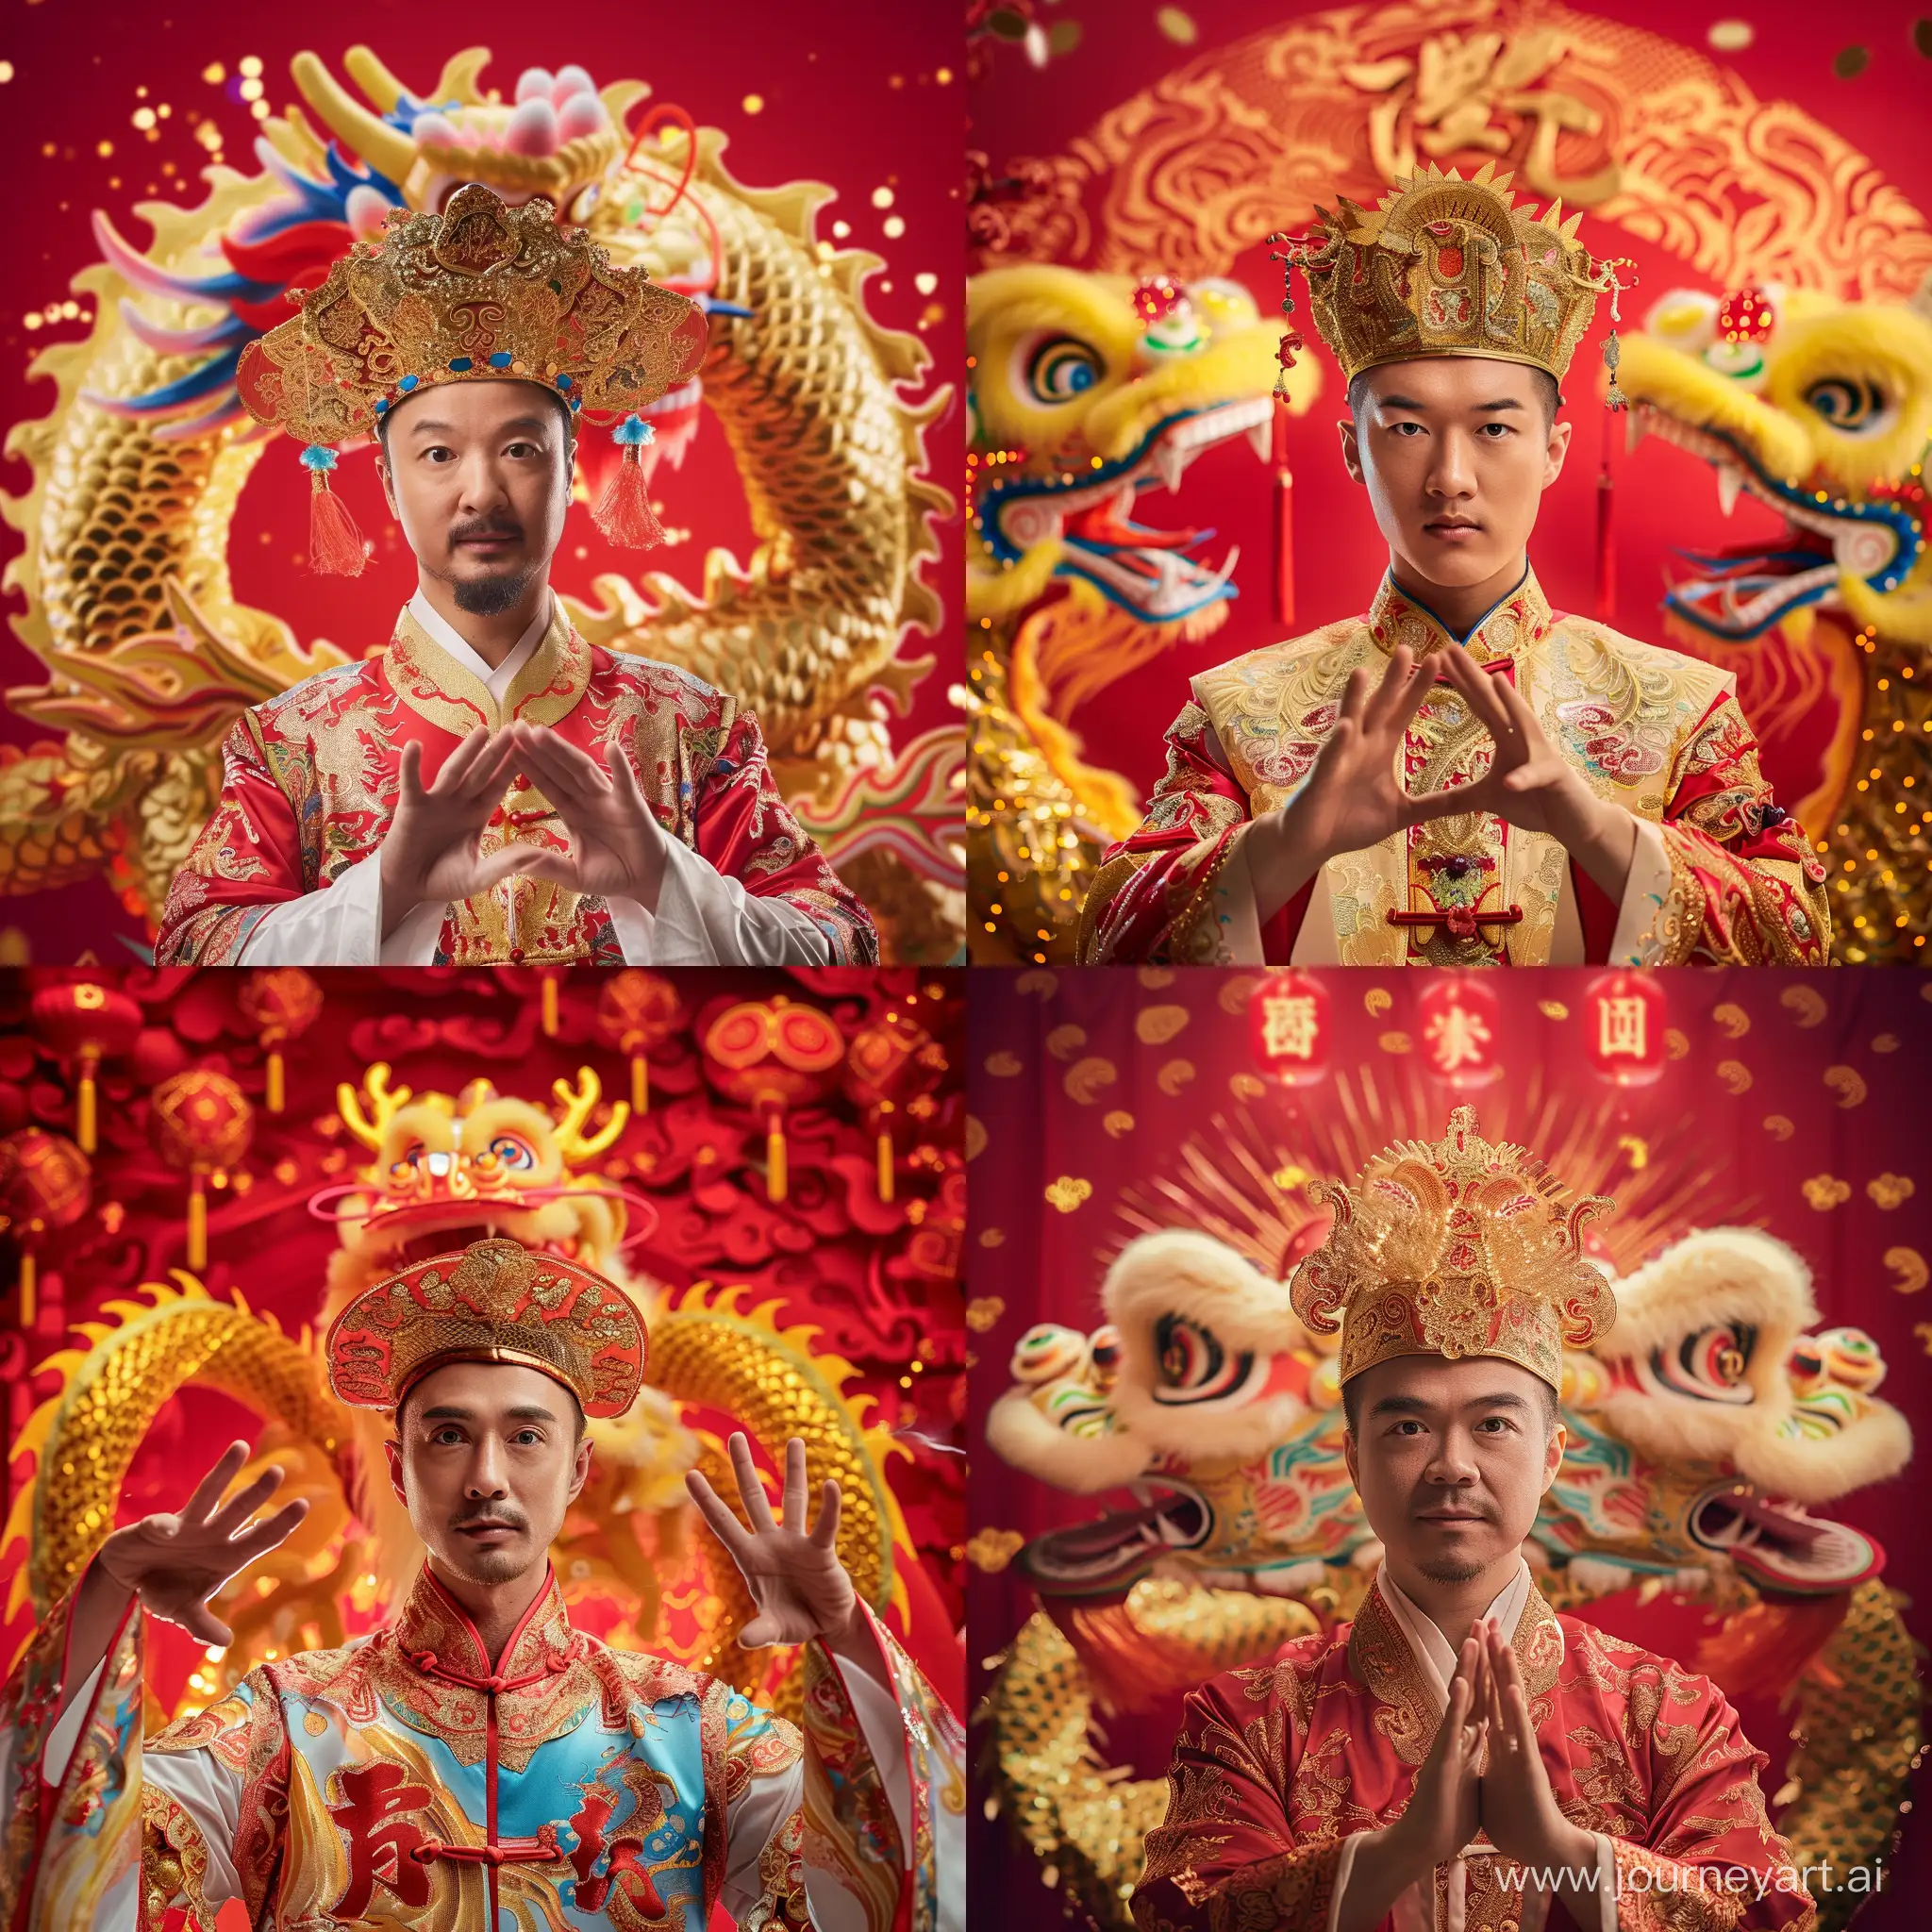 A 30-year-old Chinese male is dressed in the costume of the God of Wealth, wearing the God of Wealth's hat. Behind him is a red festive background. He faces the screen, making a traditional Chinese New Year greeting gesture. A golden Chinese dragon surrounds him from behind, creating a joyful atmosphere. --v 6 --ar 1:1 --no 86016